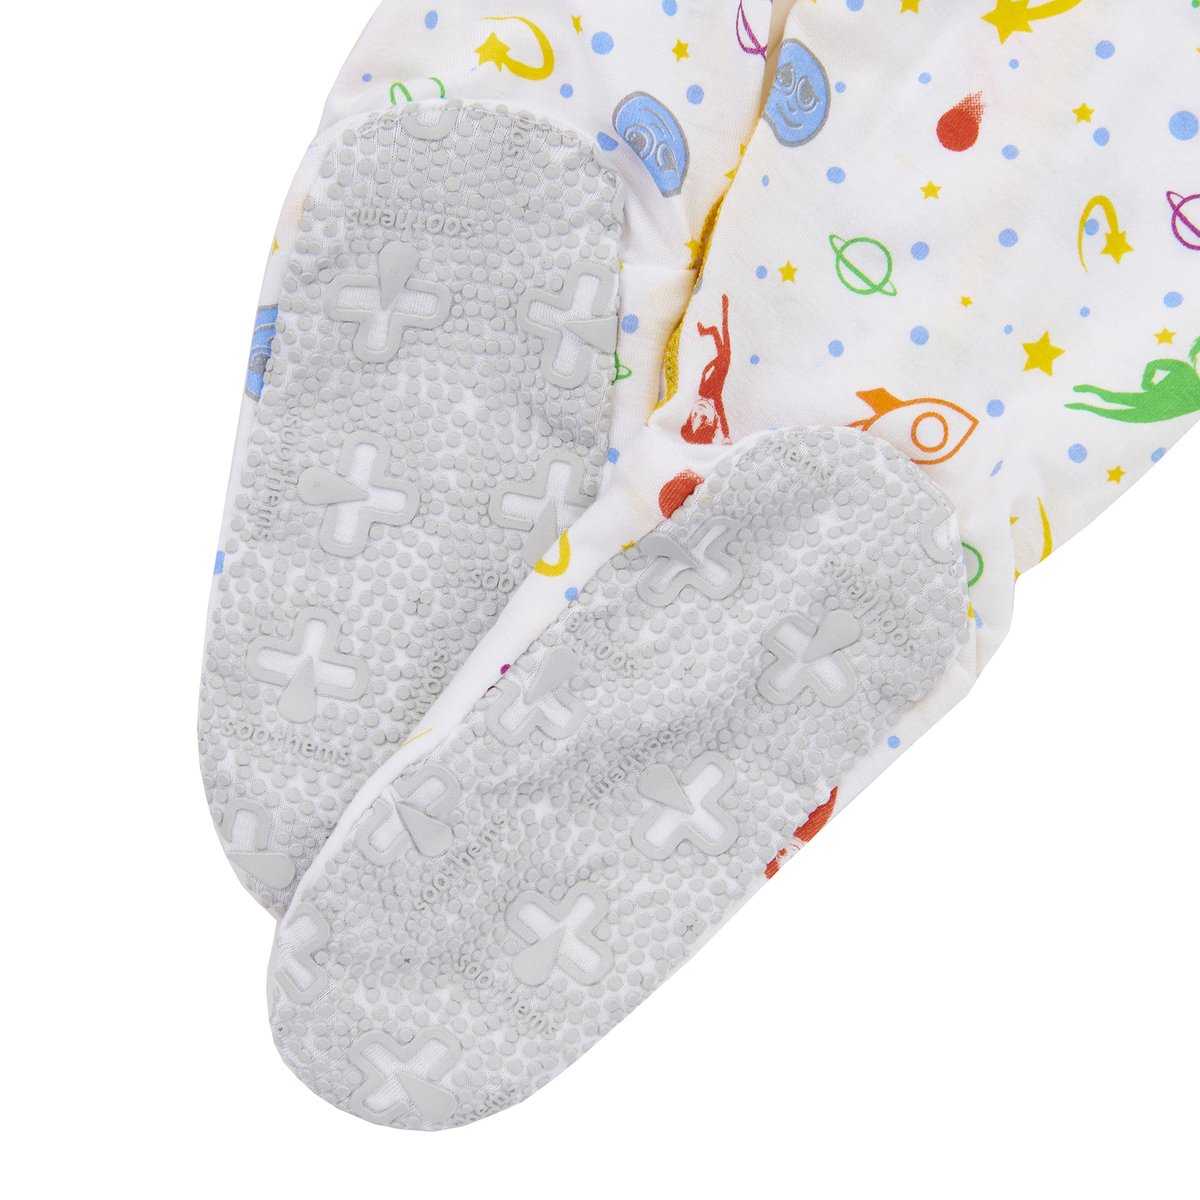 “Children's Eczema Pajama Leggings Control leg, knee, ankle and foot itching at Night”